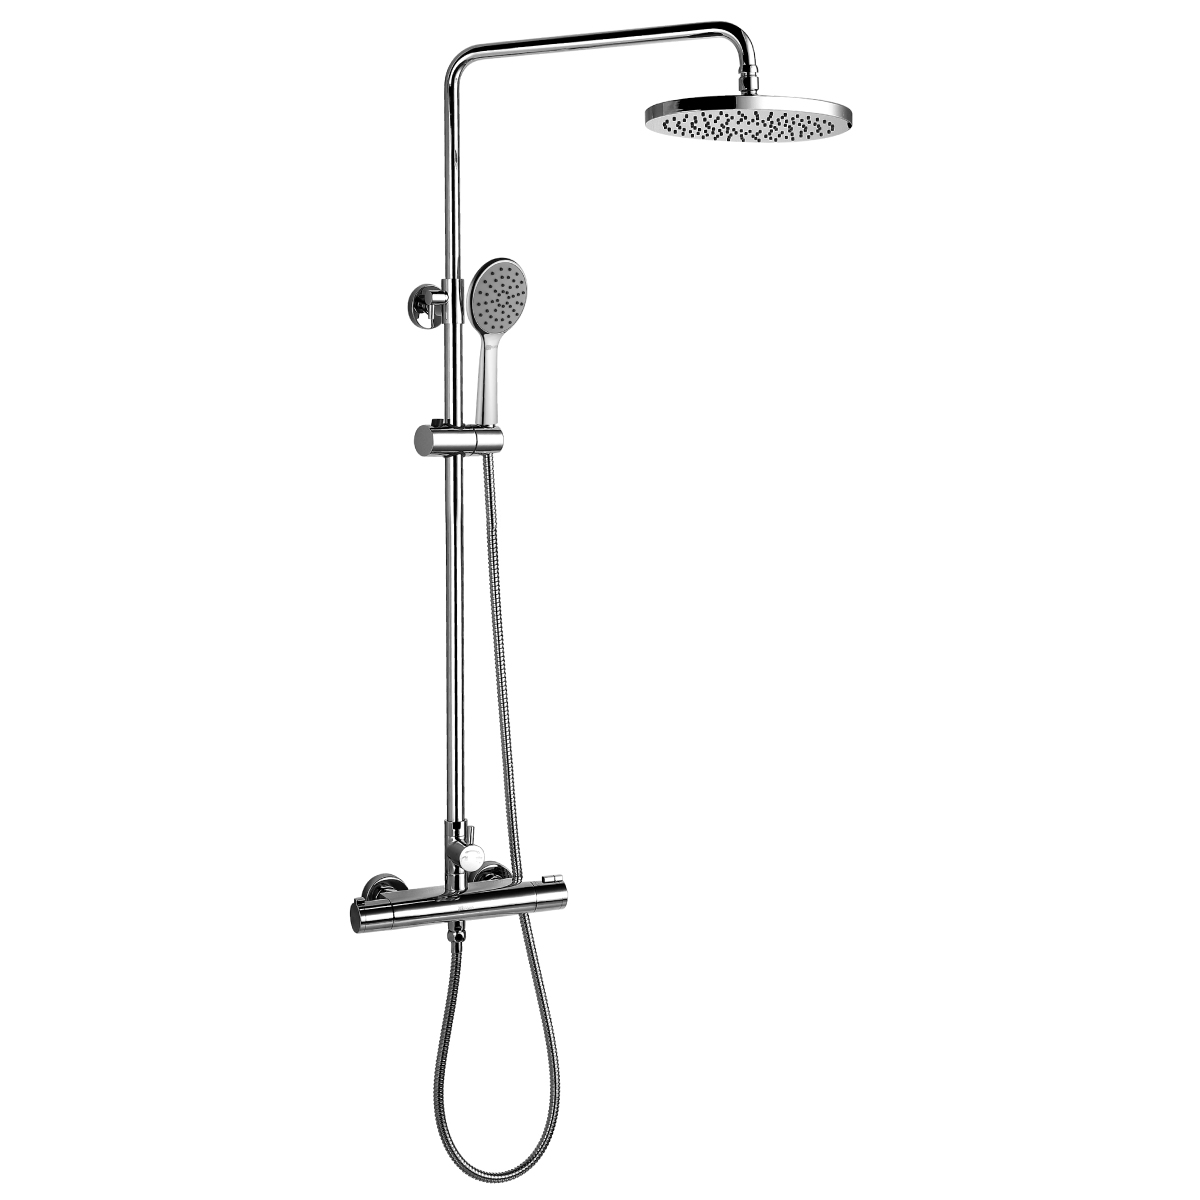 LM7860C Thermostatic shower faucet with adjustable rod height and «Tropical rain» shower head